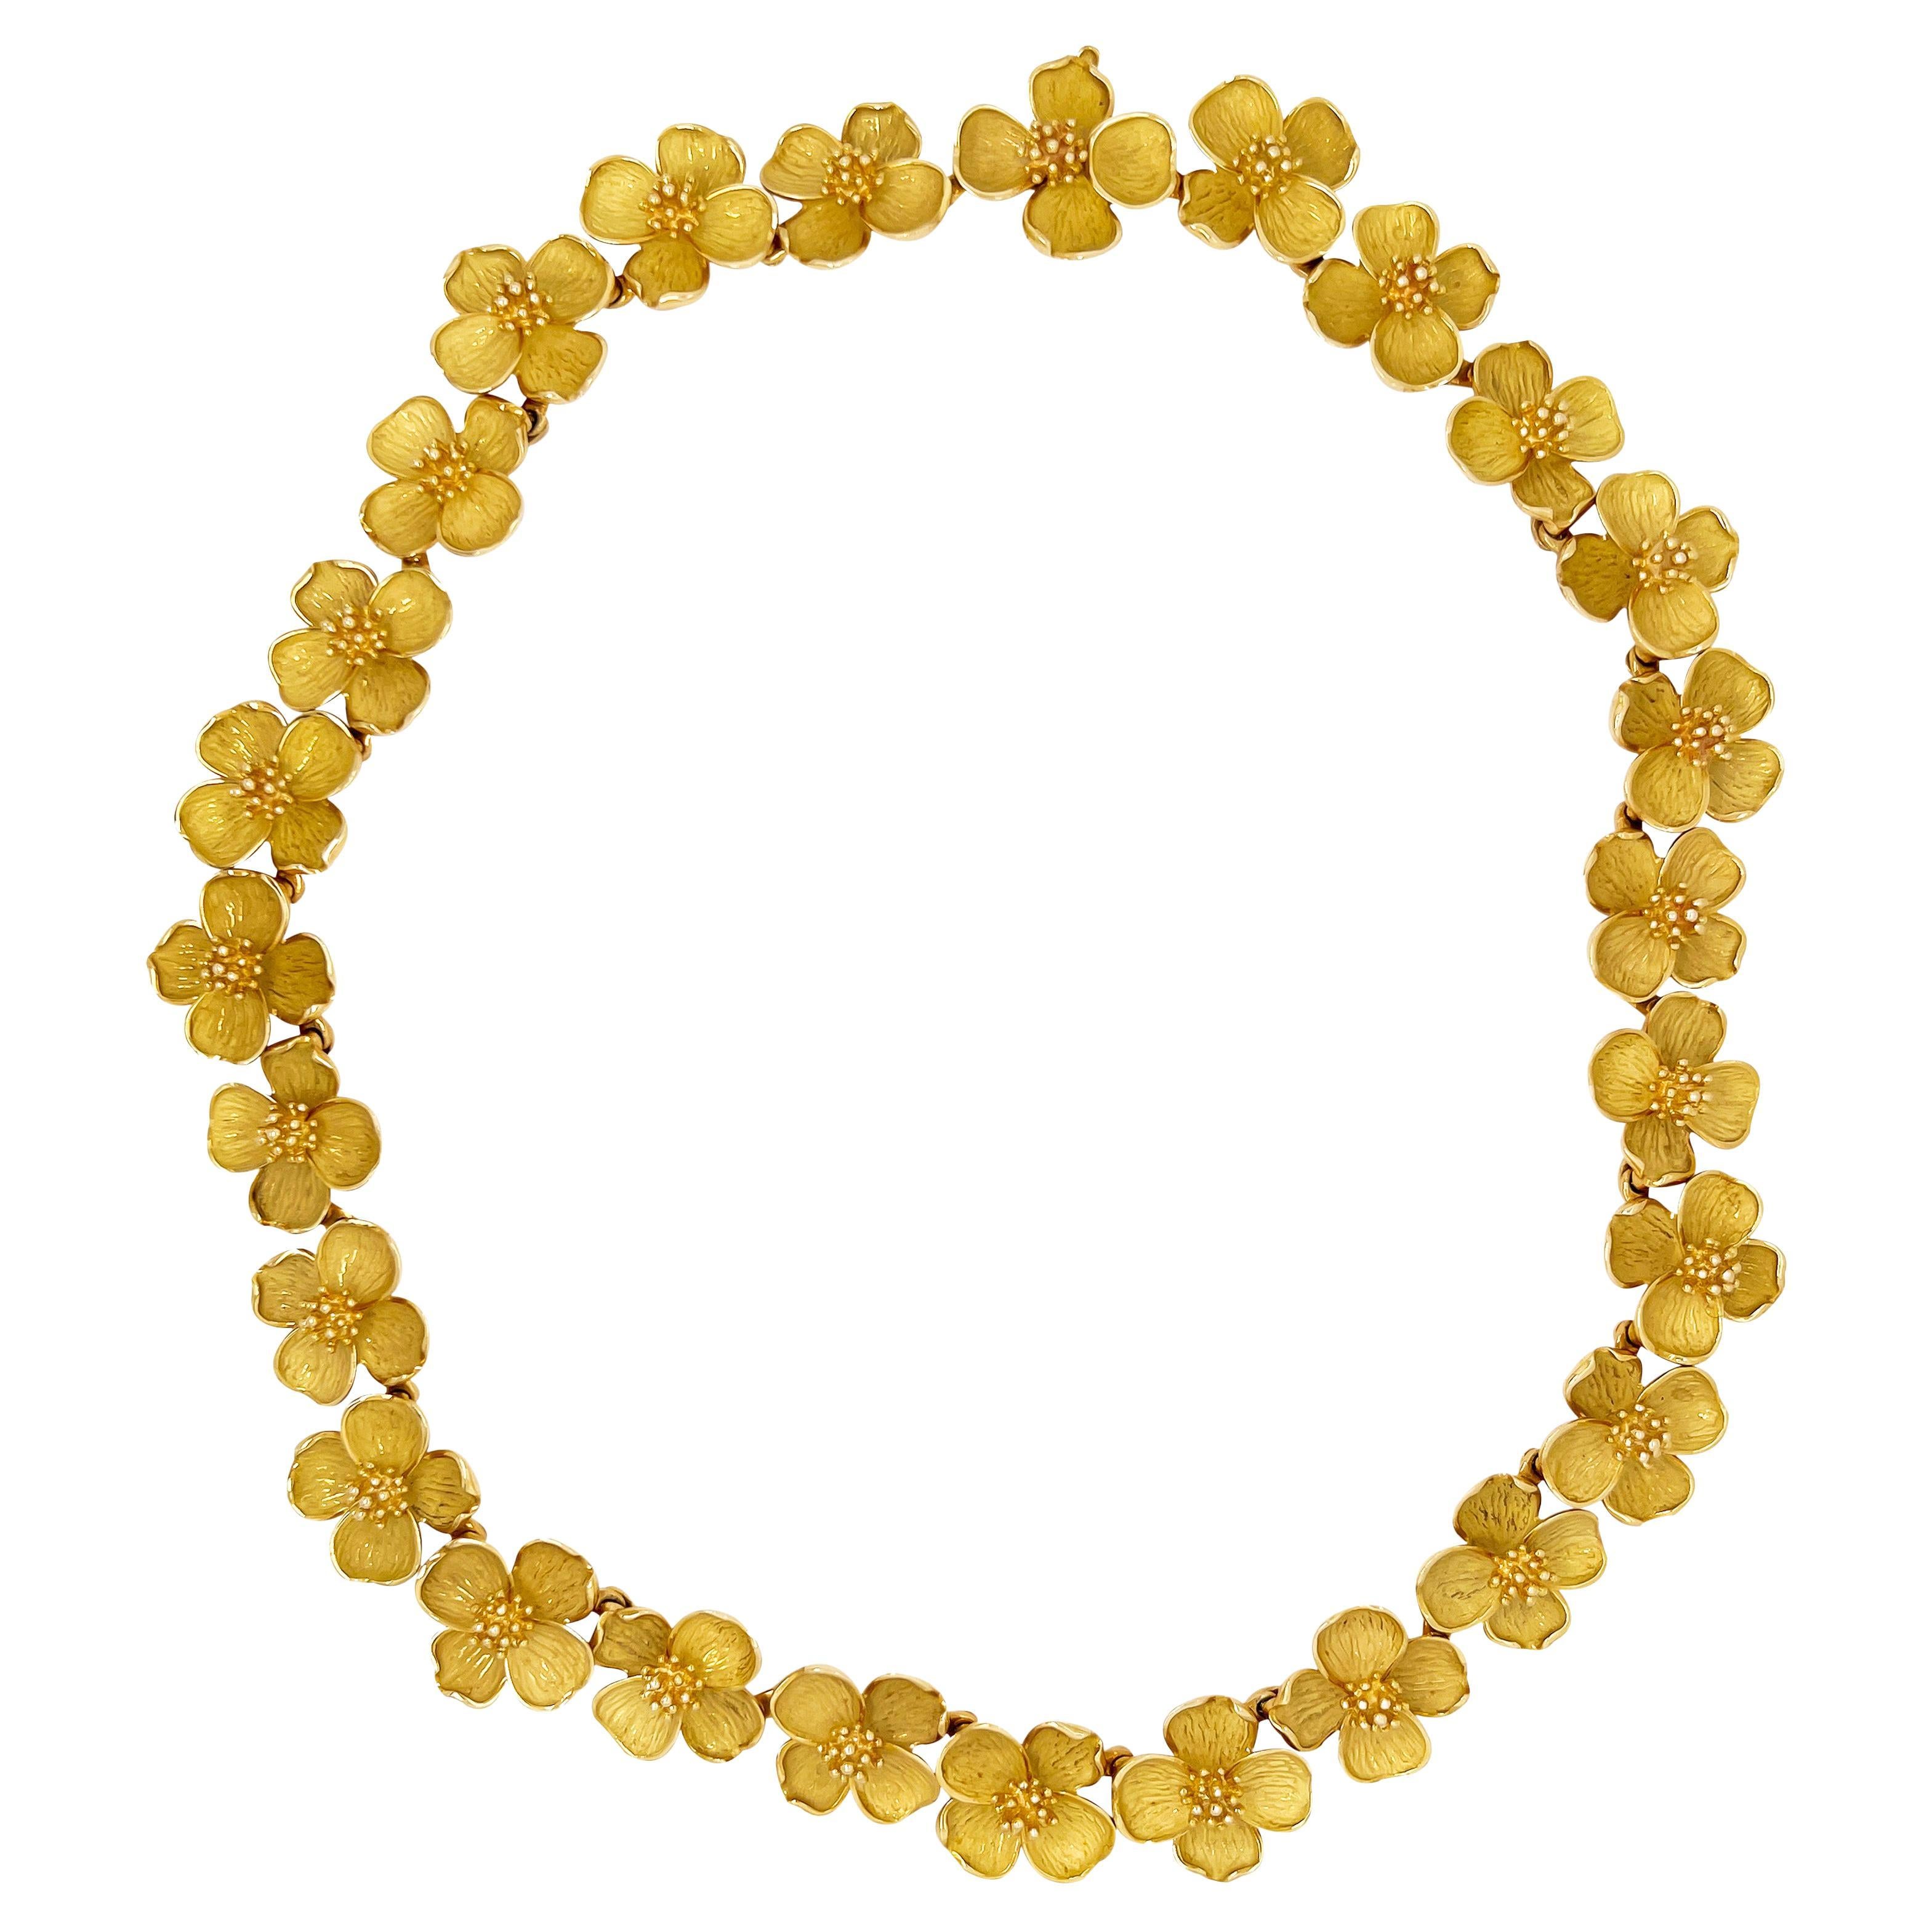 Tiffany & Co. Dogwood Collection 18K Yellow Gold Flower Link Necklace